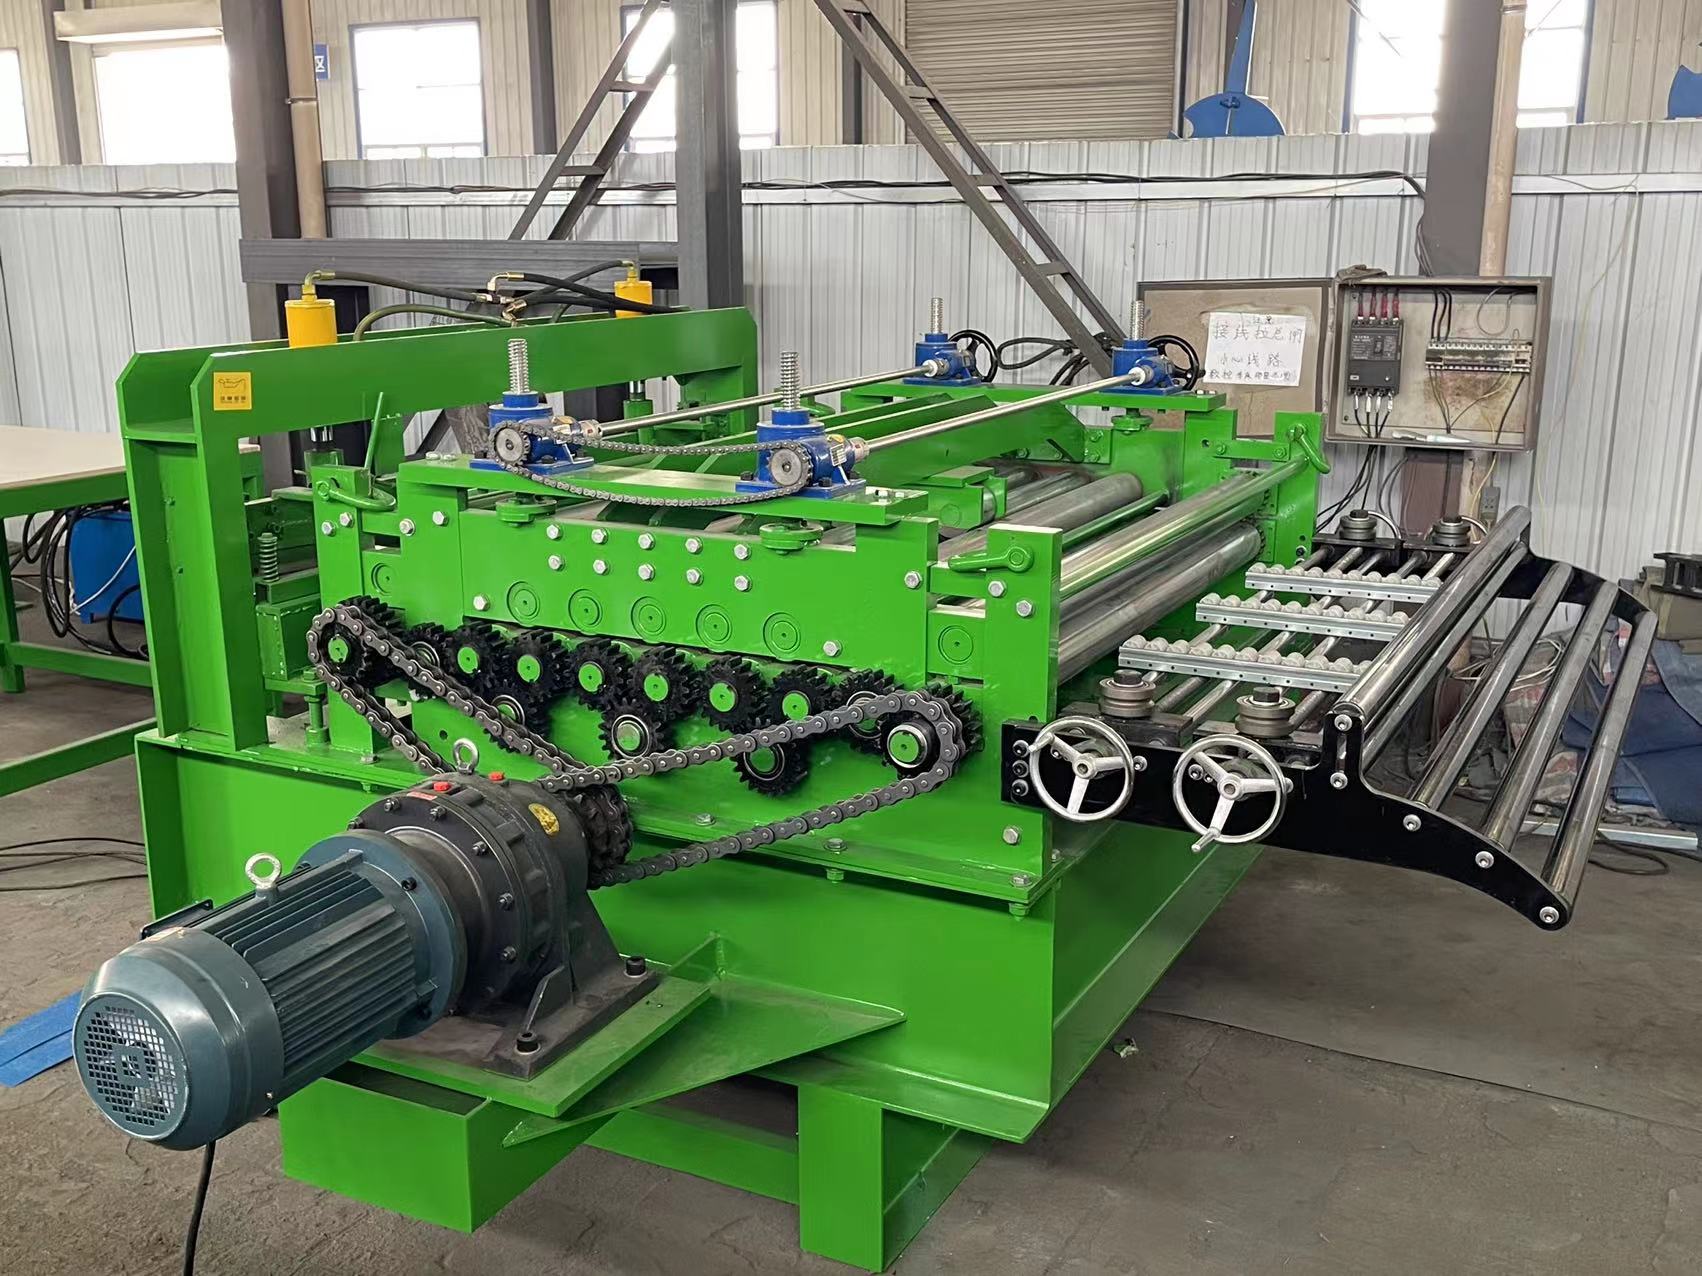 Slitting and Cut to Length Machine,Steel Sheet Metal Coil Cut to Length Line metal slitter6 Slitting and Cut to Length Machine,Steel Sheet Metal Coil Cut to Length Line metal slitter